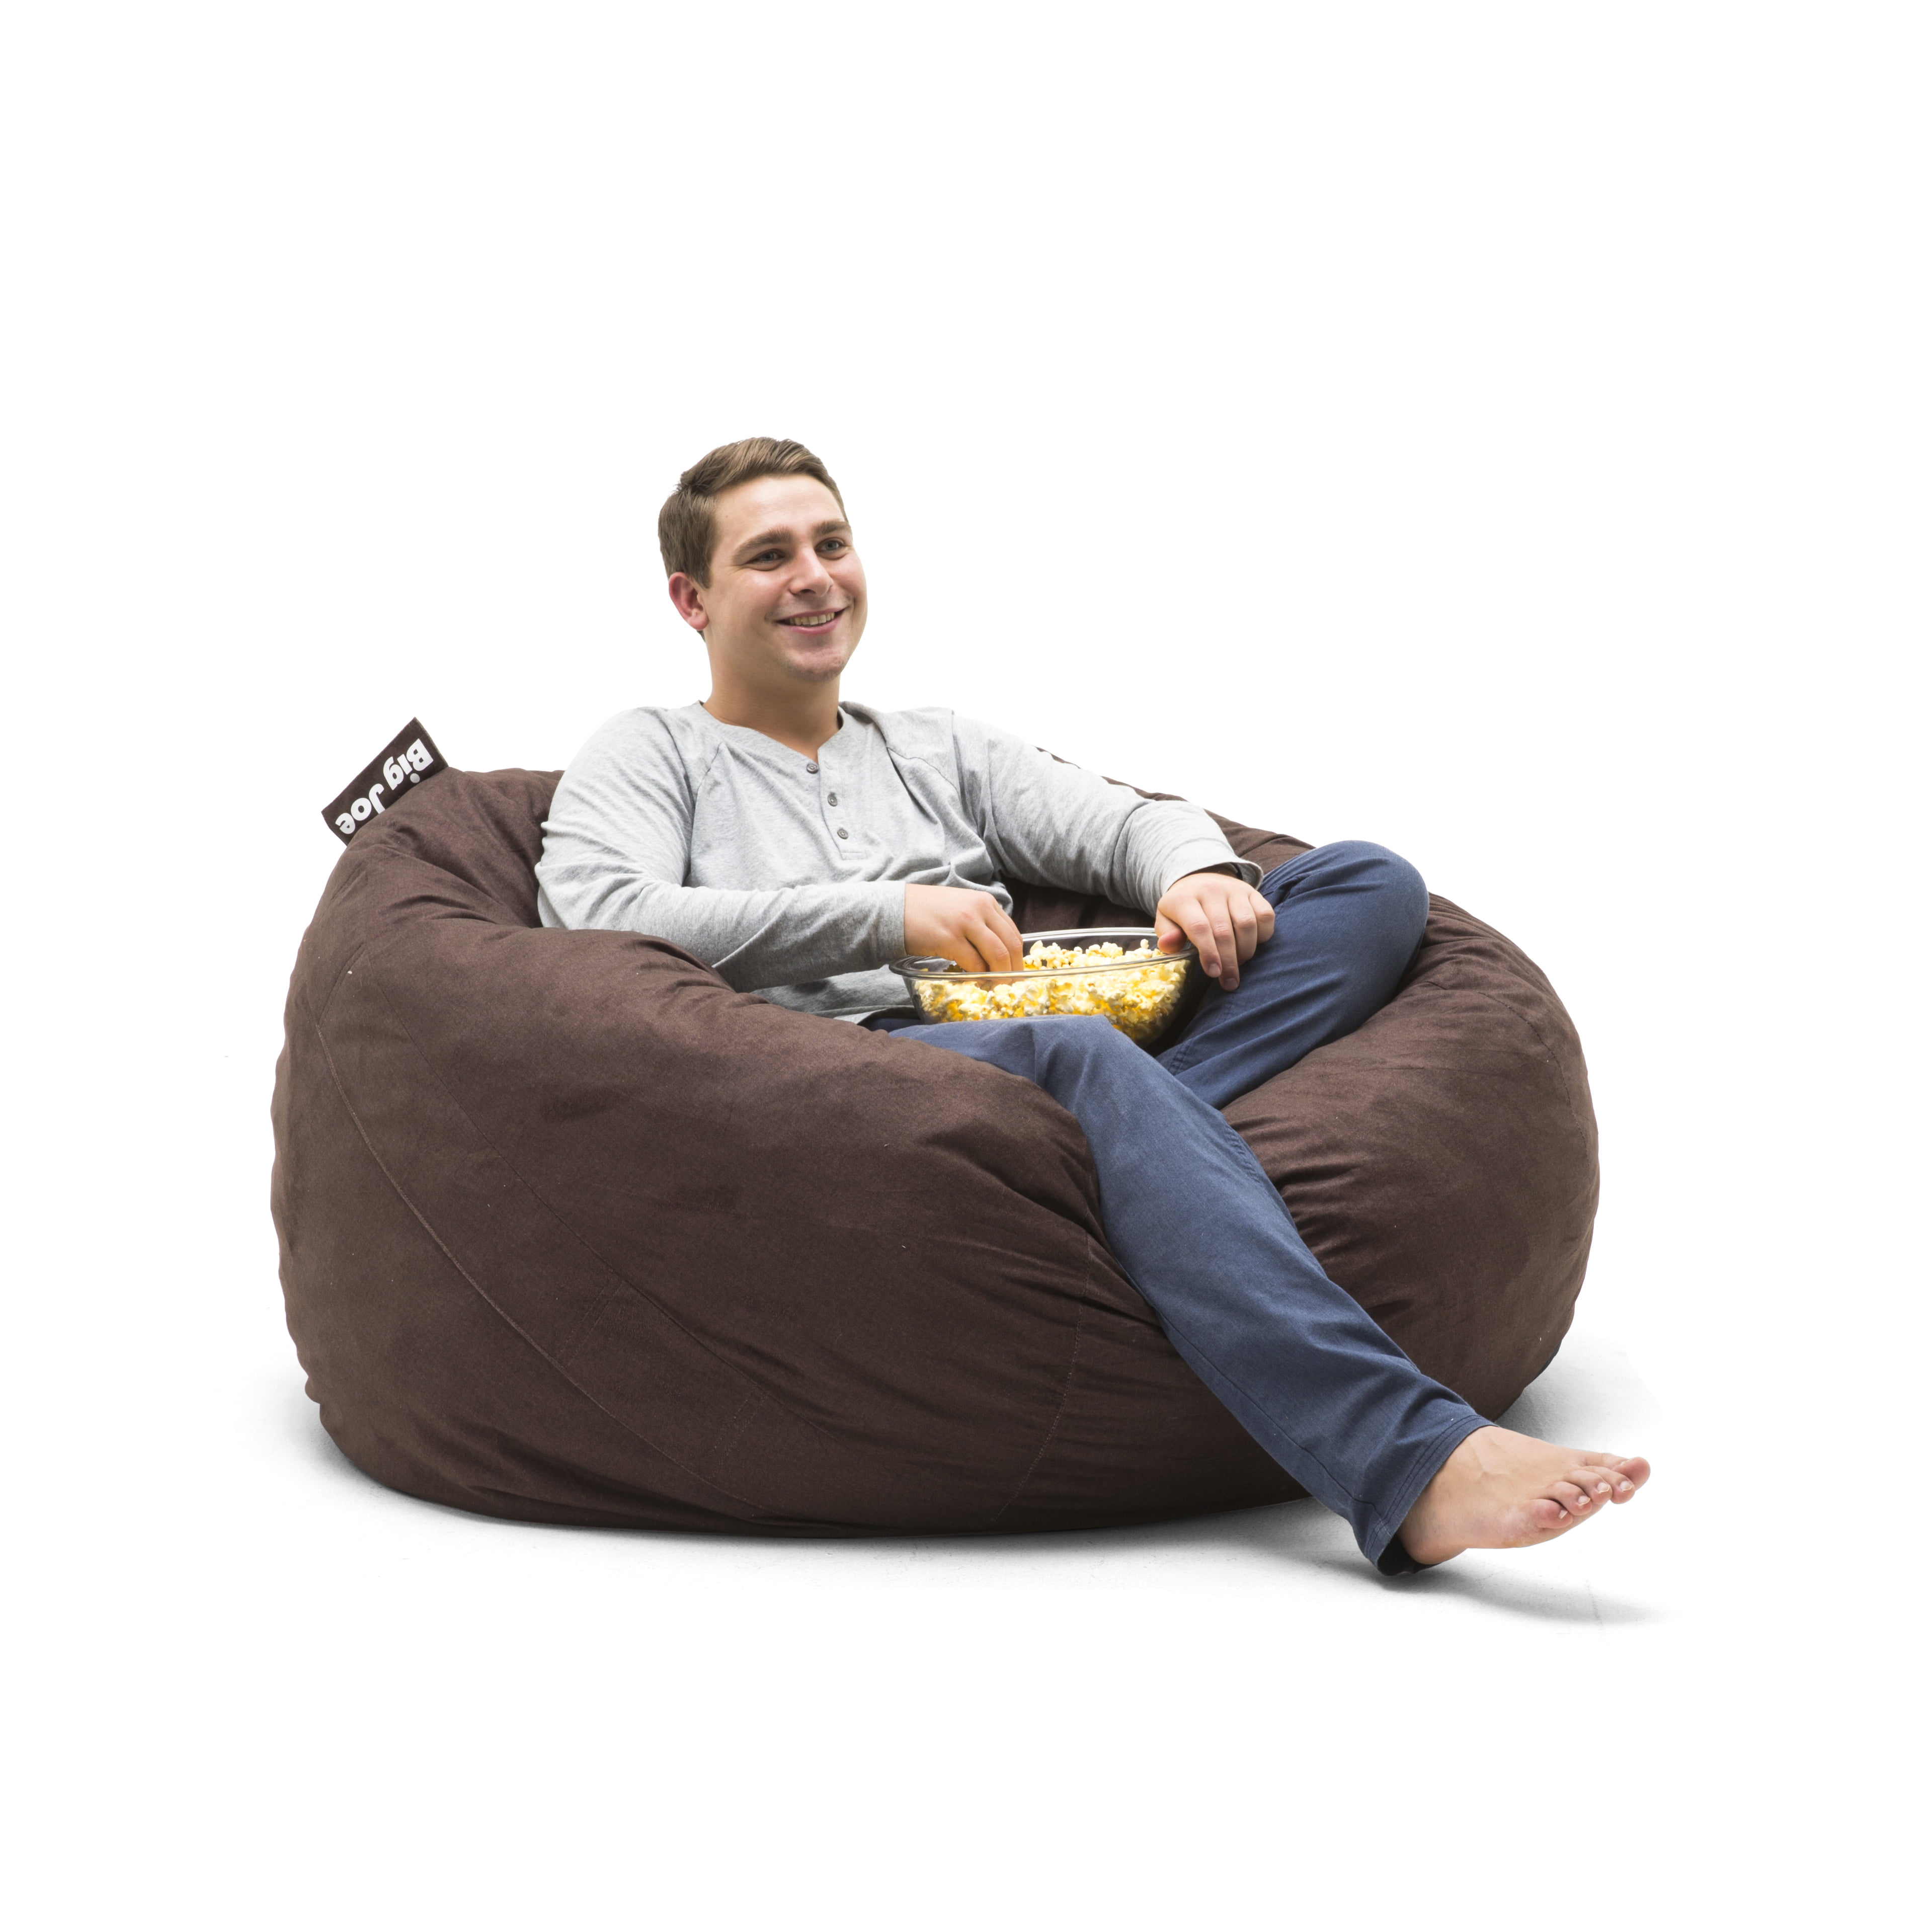 Creatice Bean Bag Game Chair Walmart for Large Space